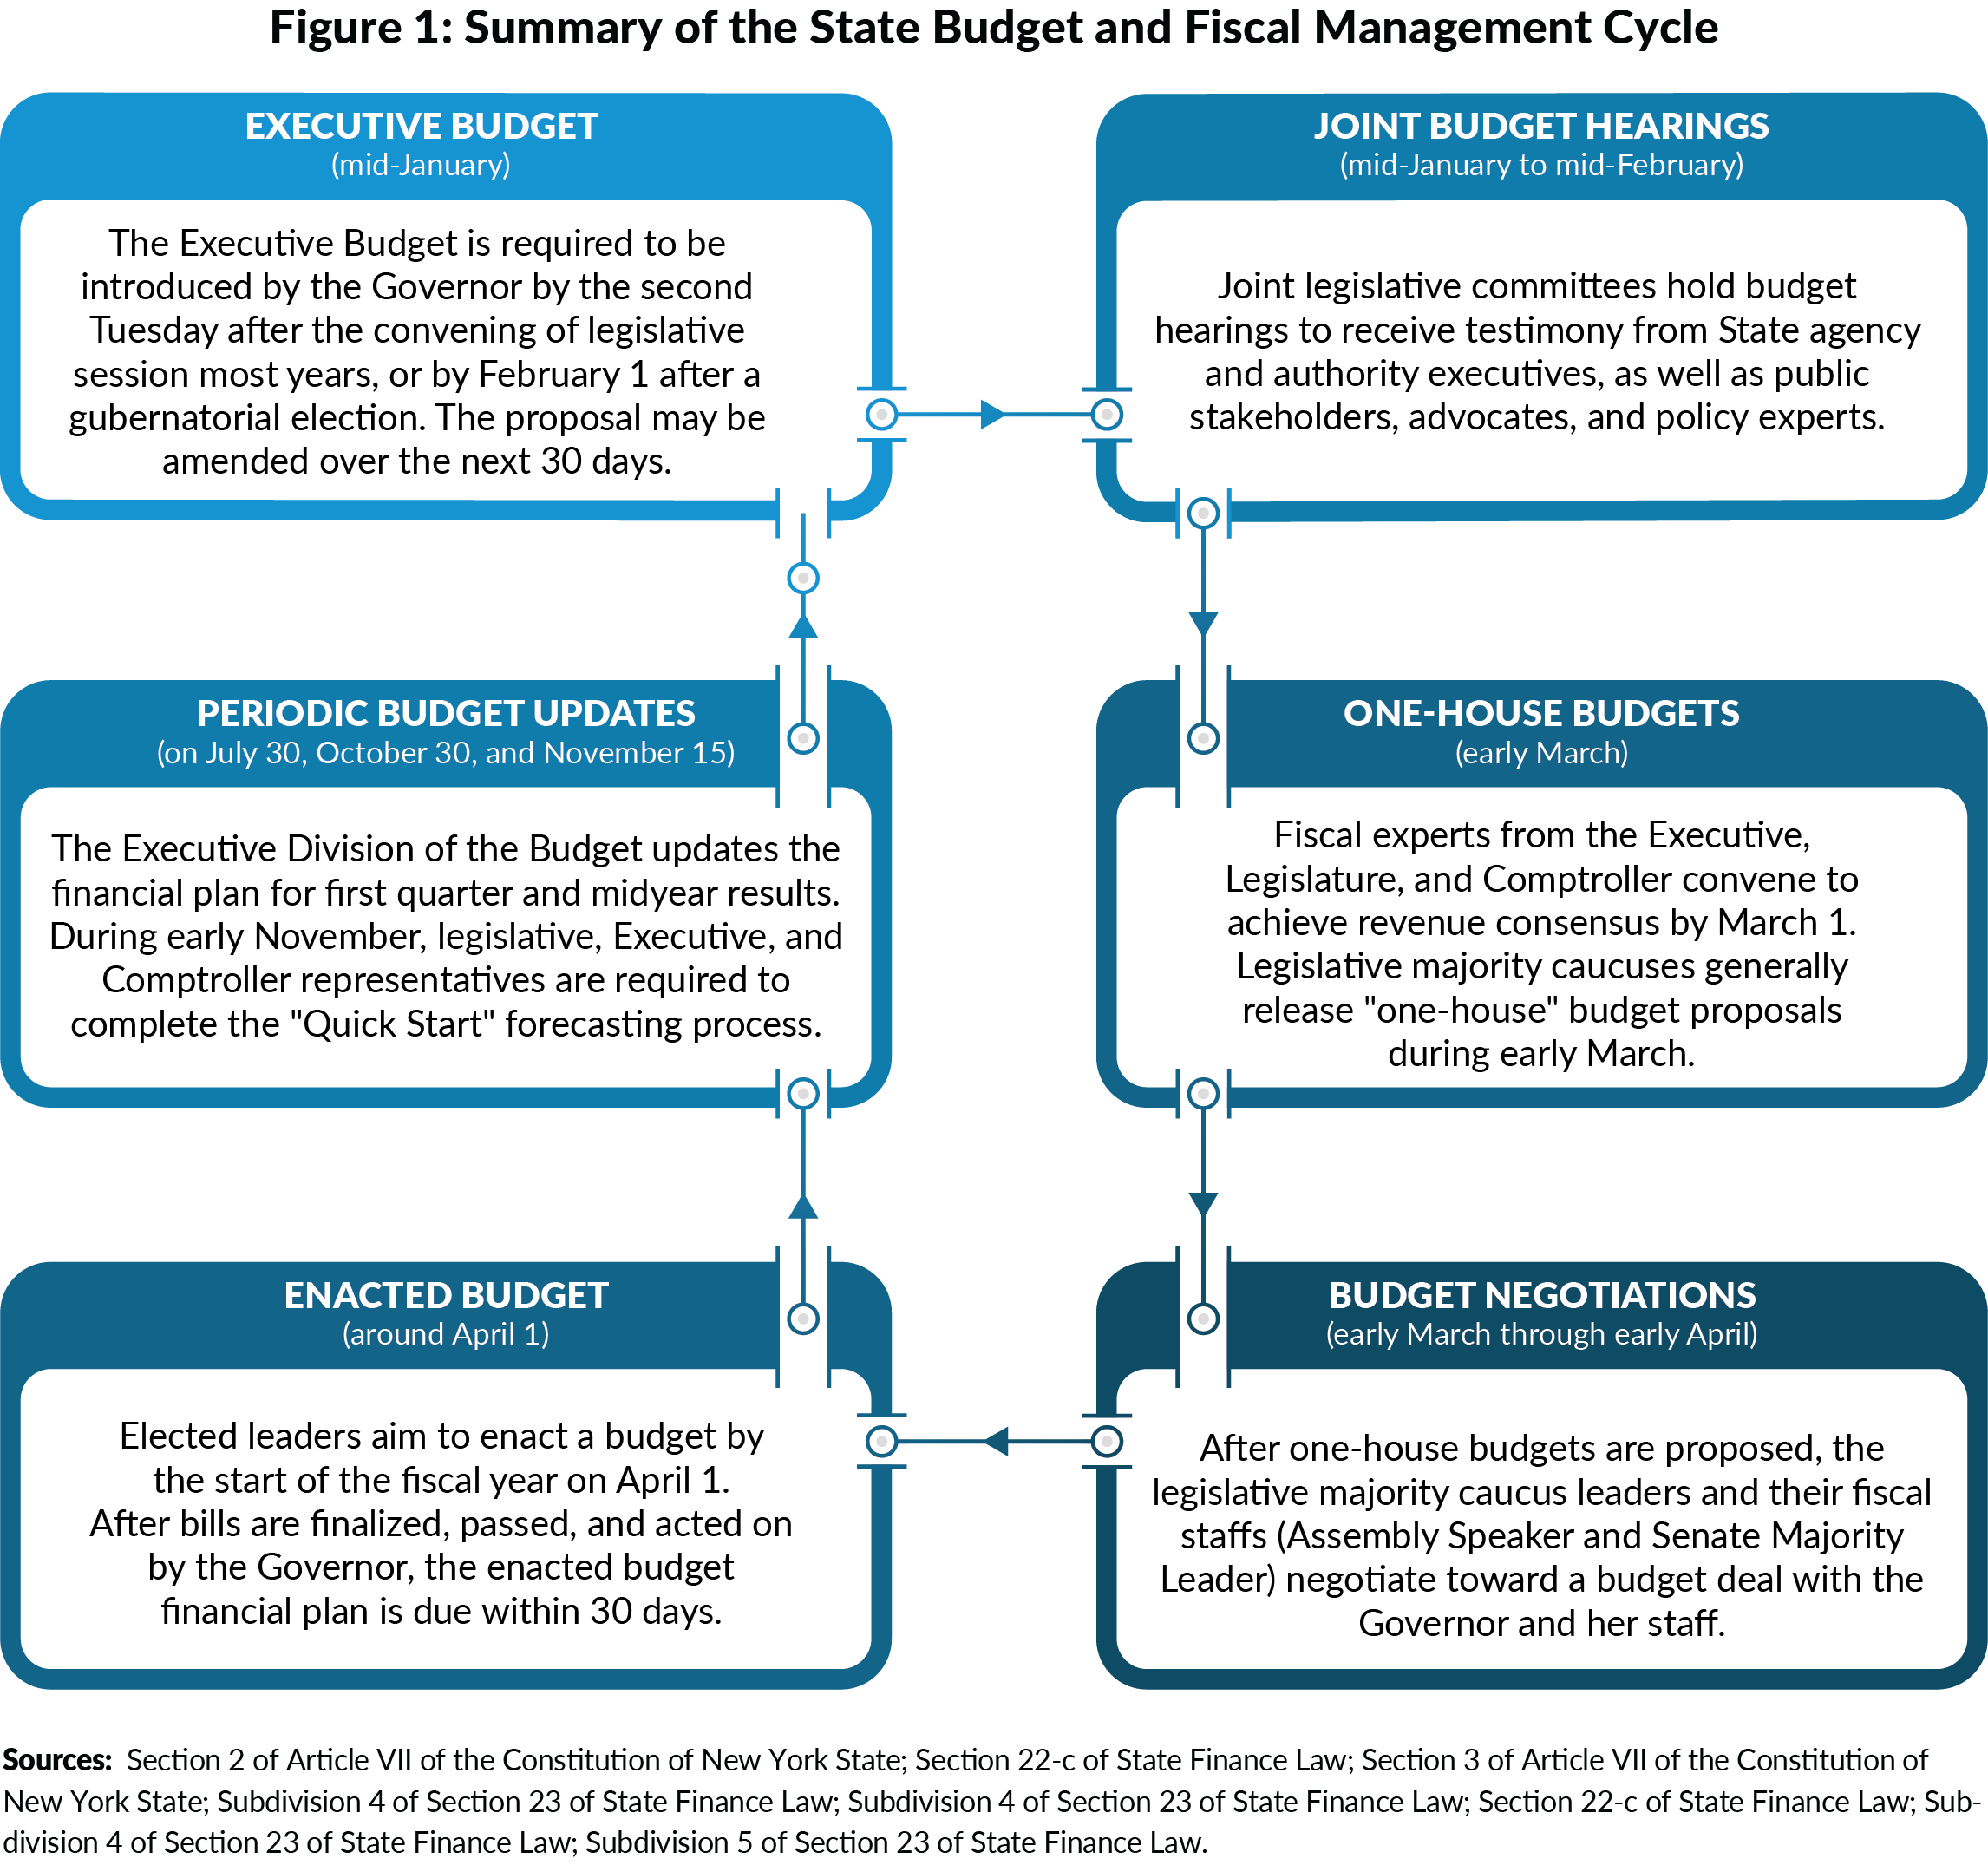 Figure 1: Summary of the State Budget and Fiscal Management Cycle